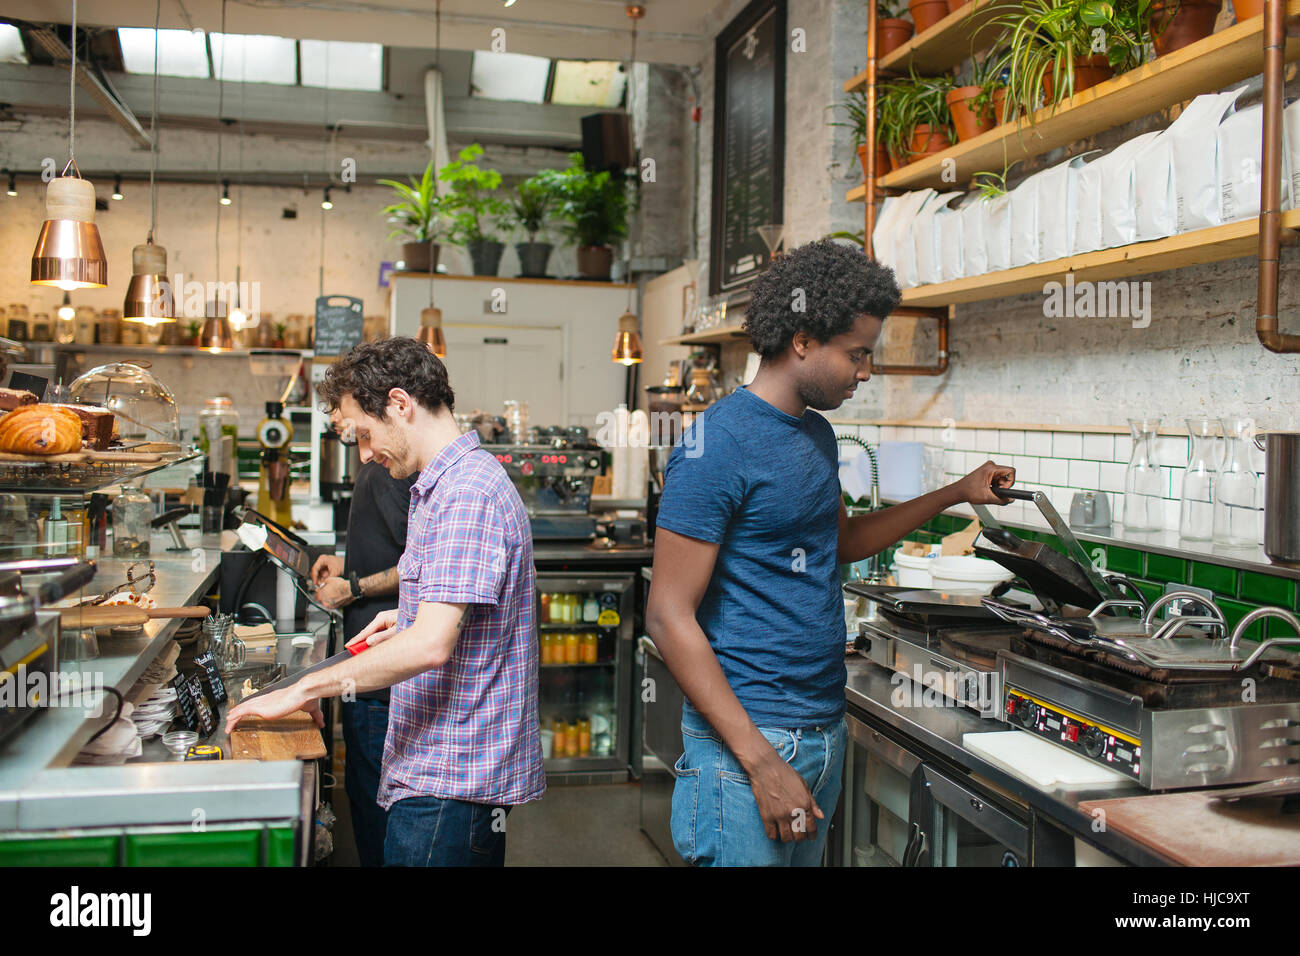 Two waiters preparing food in cafe kitchen Stock Photo